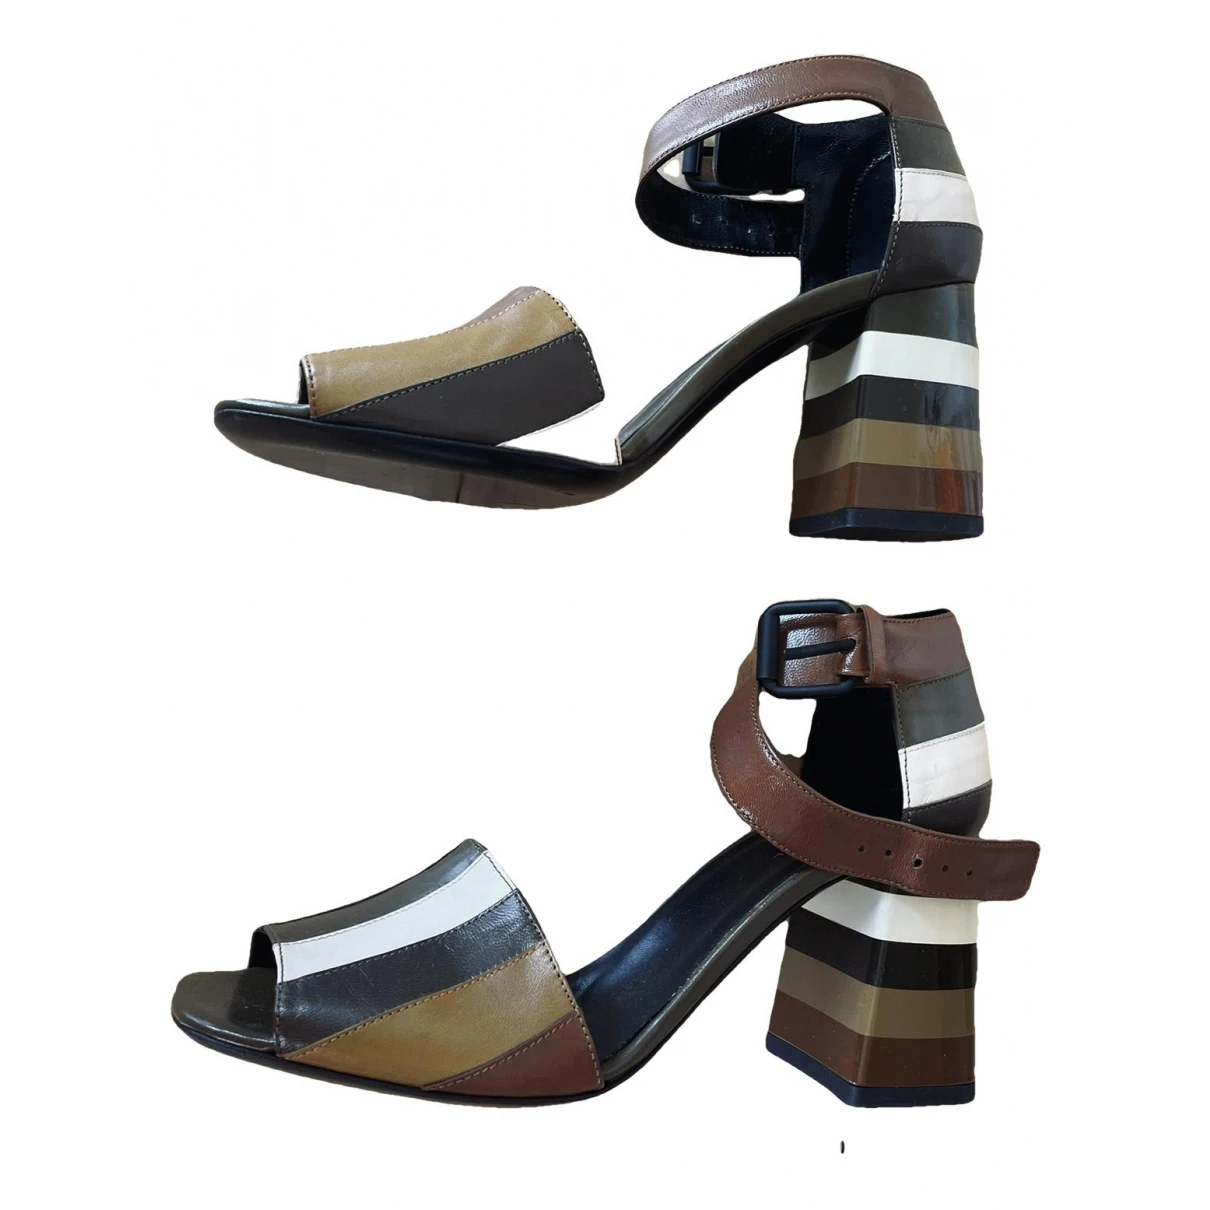 shoes Sonia Rykiel sandals for Female Leather 38 EU. Used condition